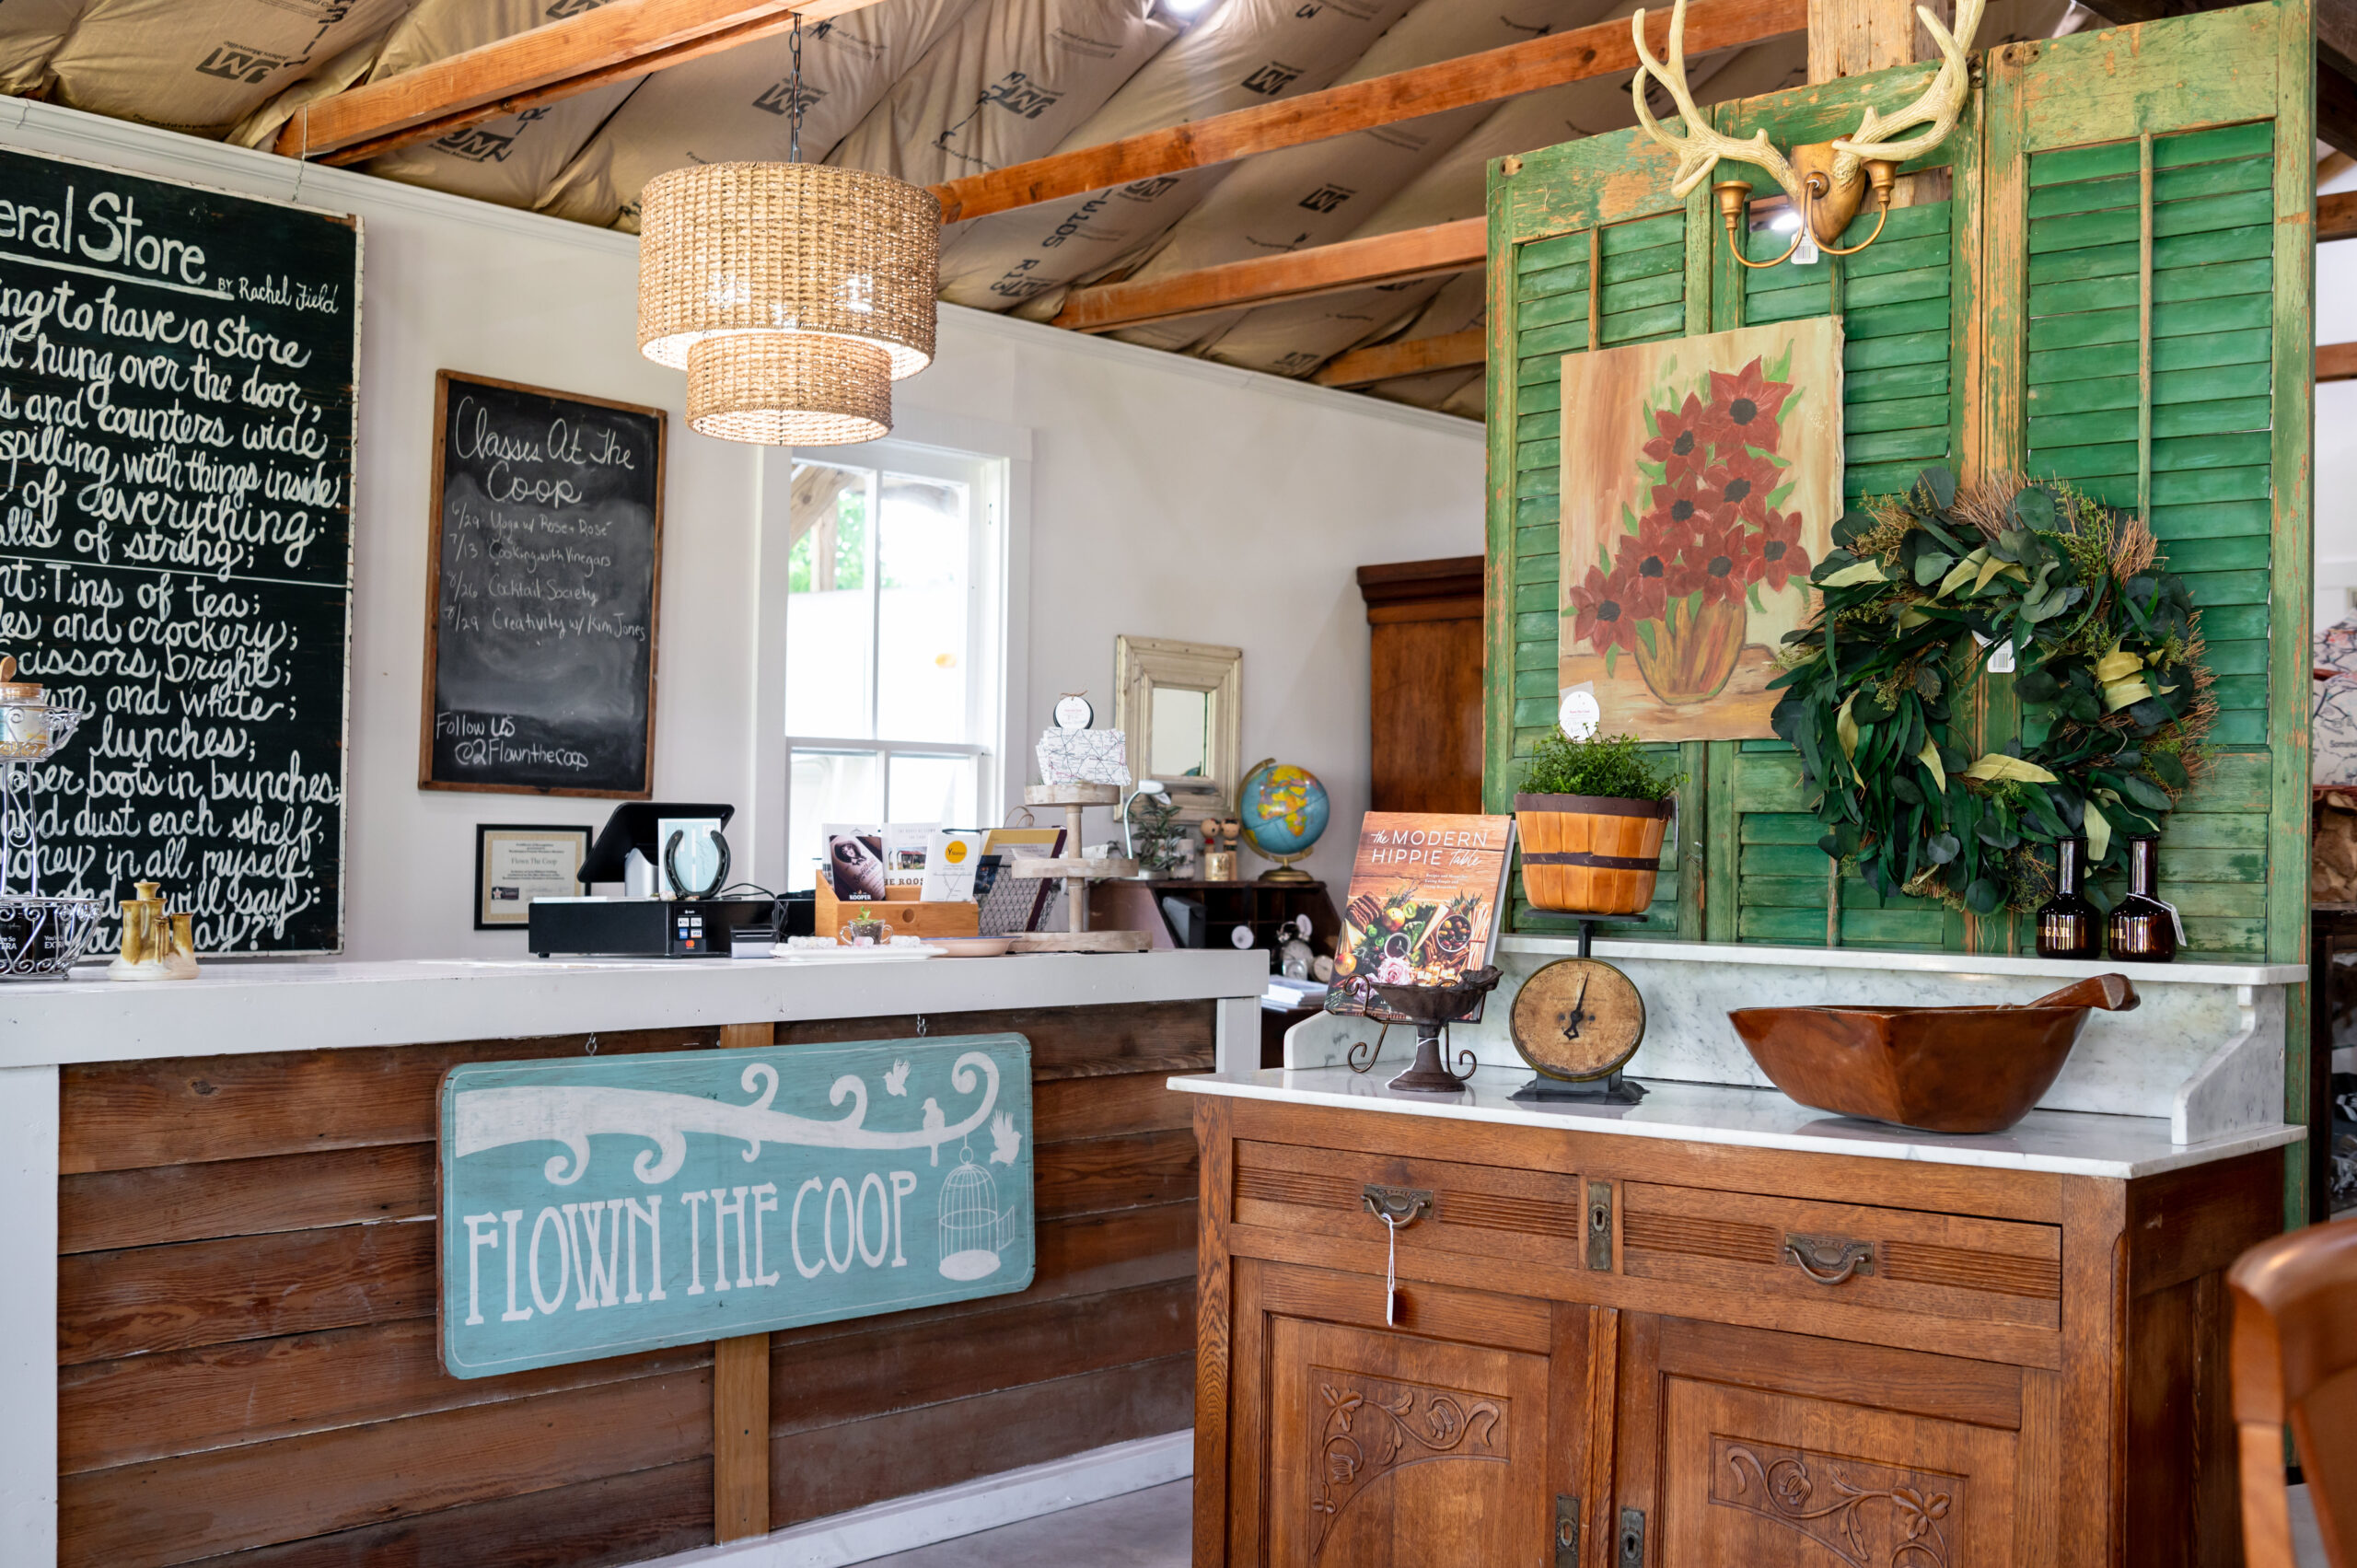 Interior Photography for a rustic quaint store in Texas